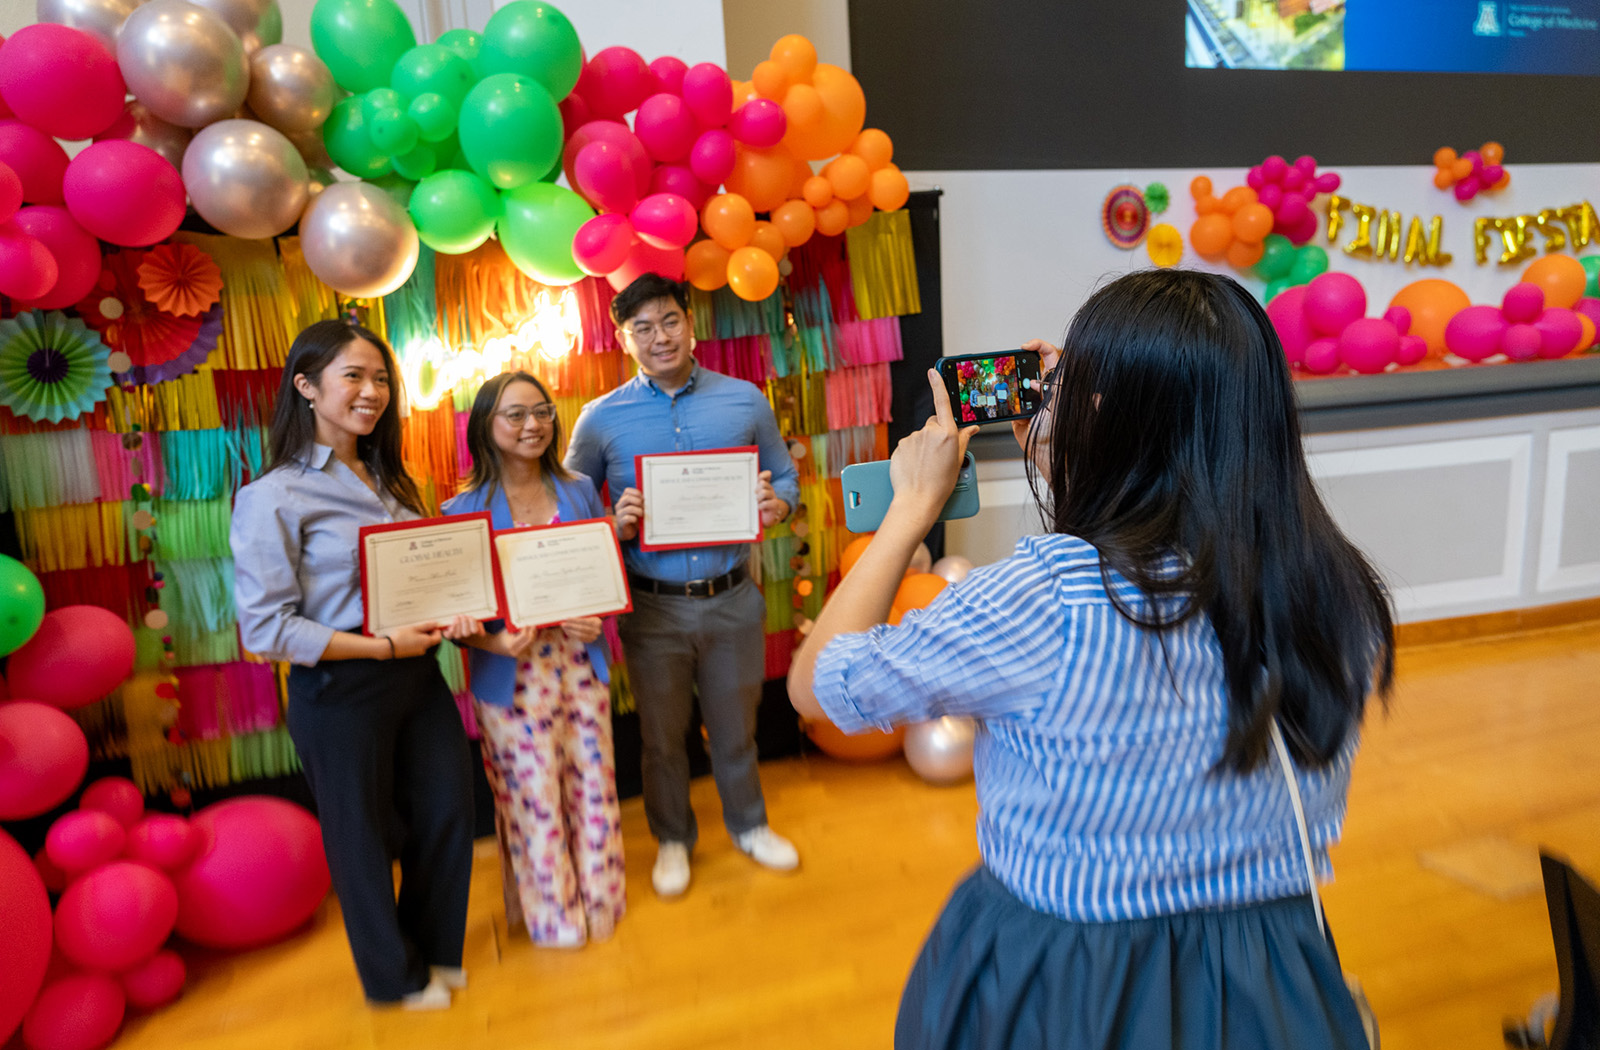 Friday, May 3, the Class of 2024 joined together at Senior Celebration to applaud those in their cohort who went the extra mile during their studies